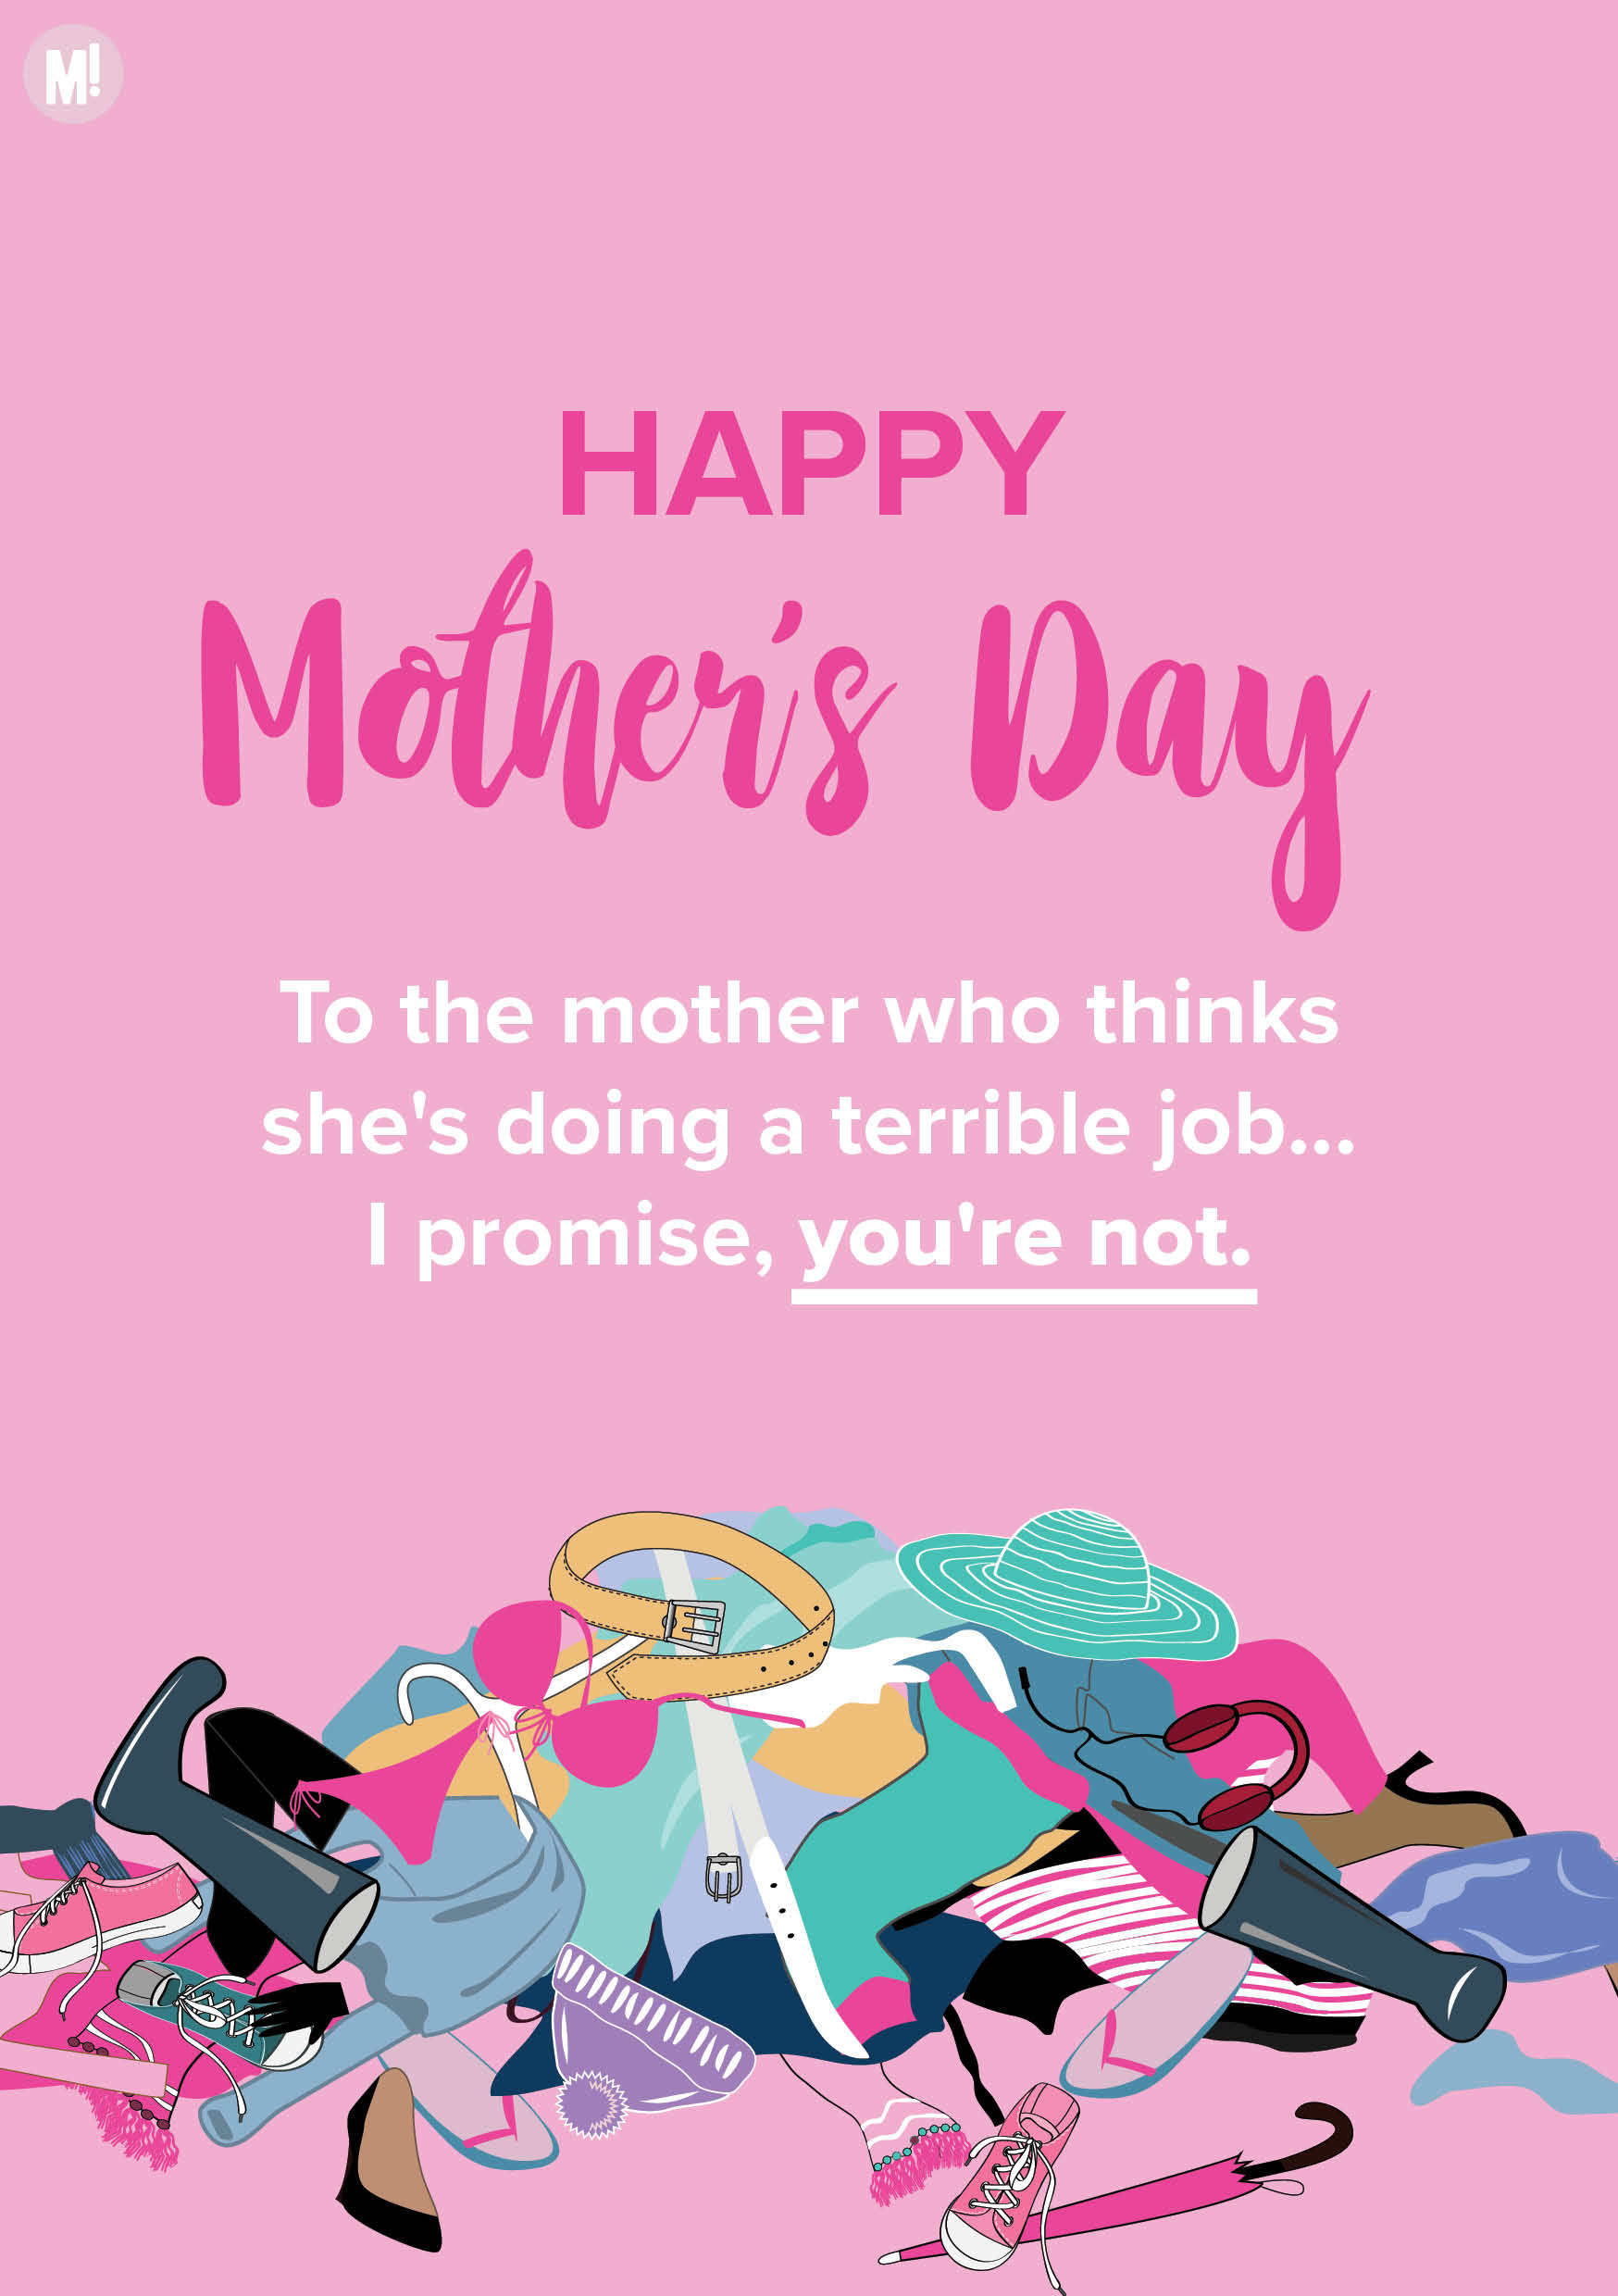 Happy Mothers Day: To the mother who thinks she's doing a terrible job... I promise you, you're not.